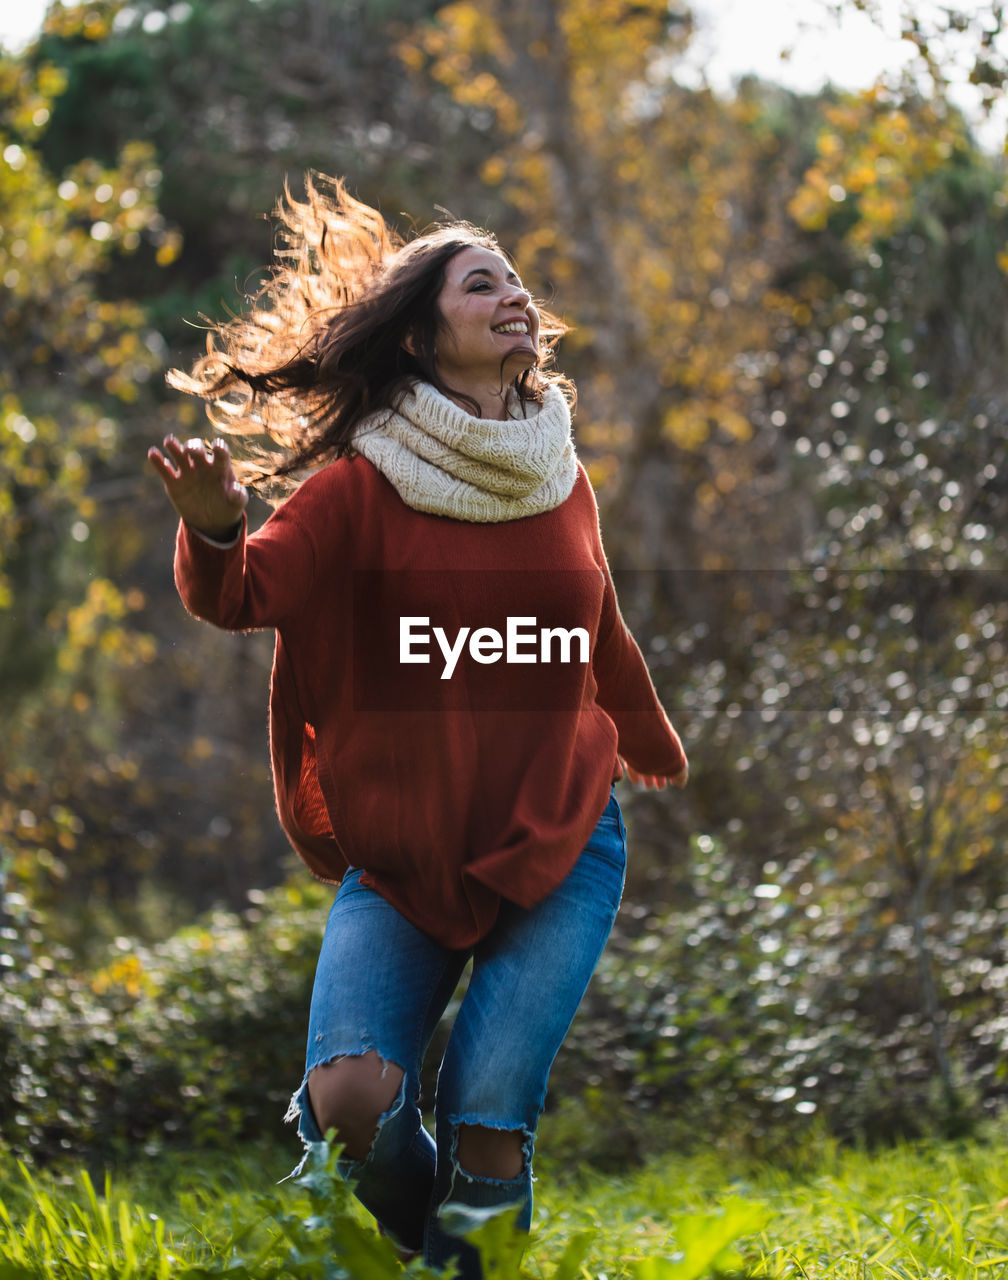 Woman in red sweater dancing happily on a meadow in a forest.